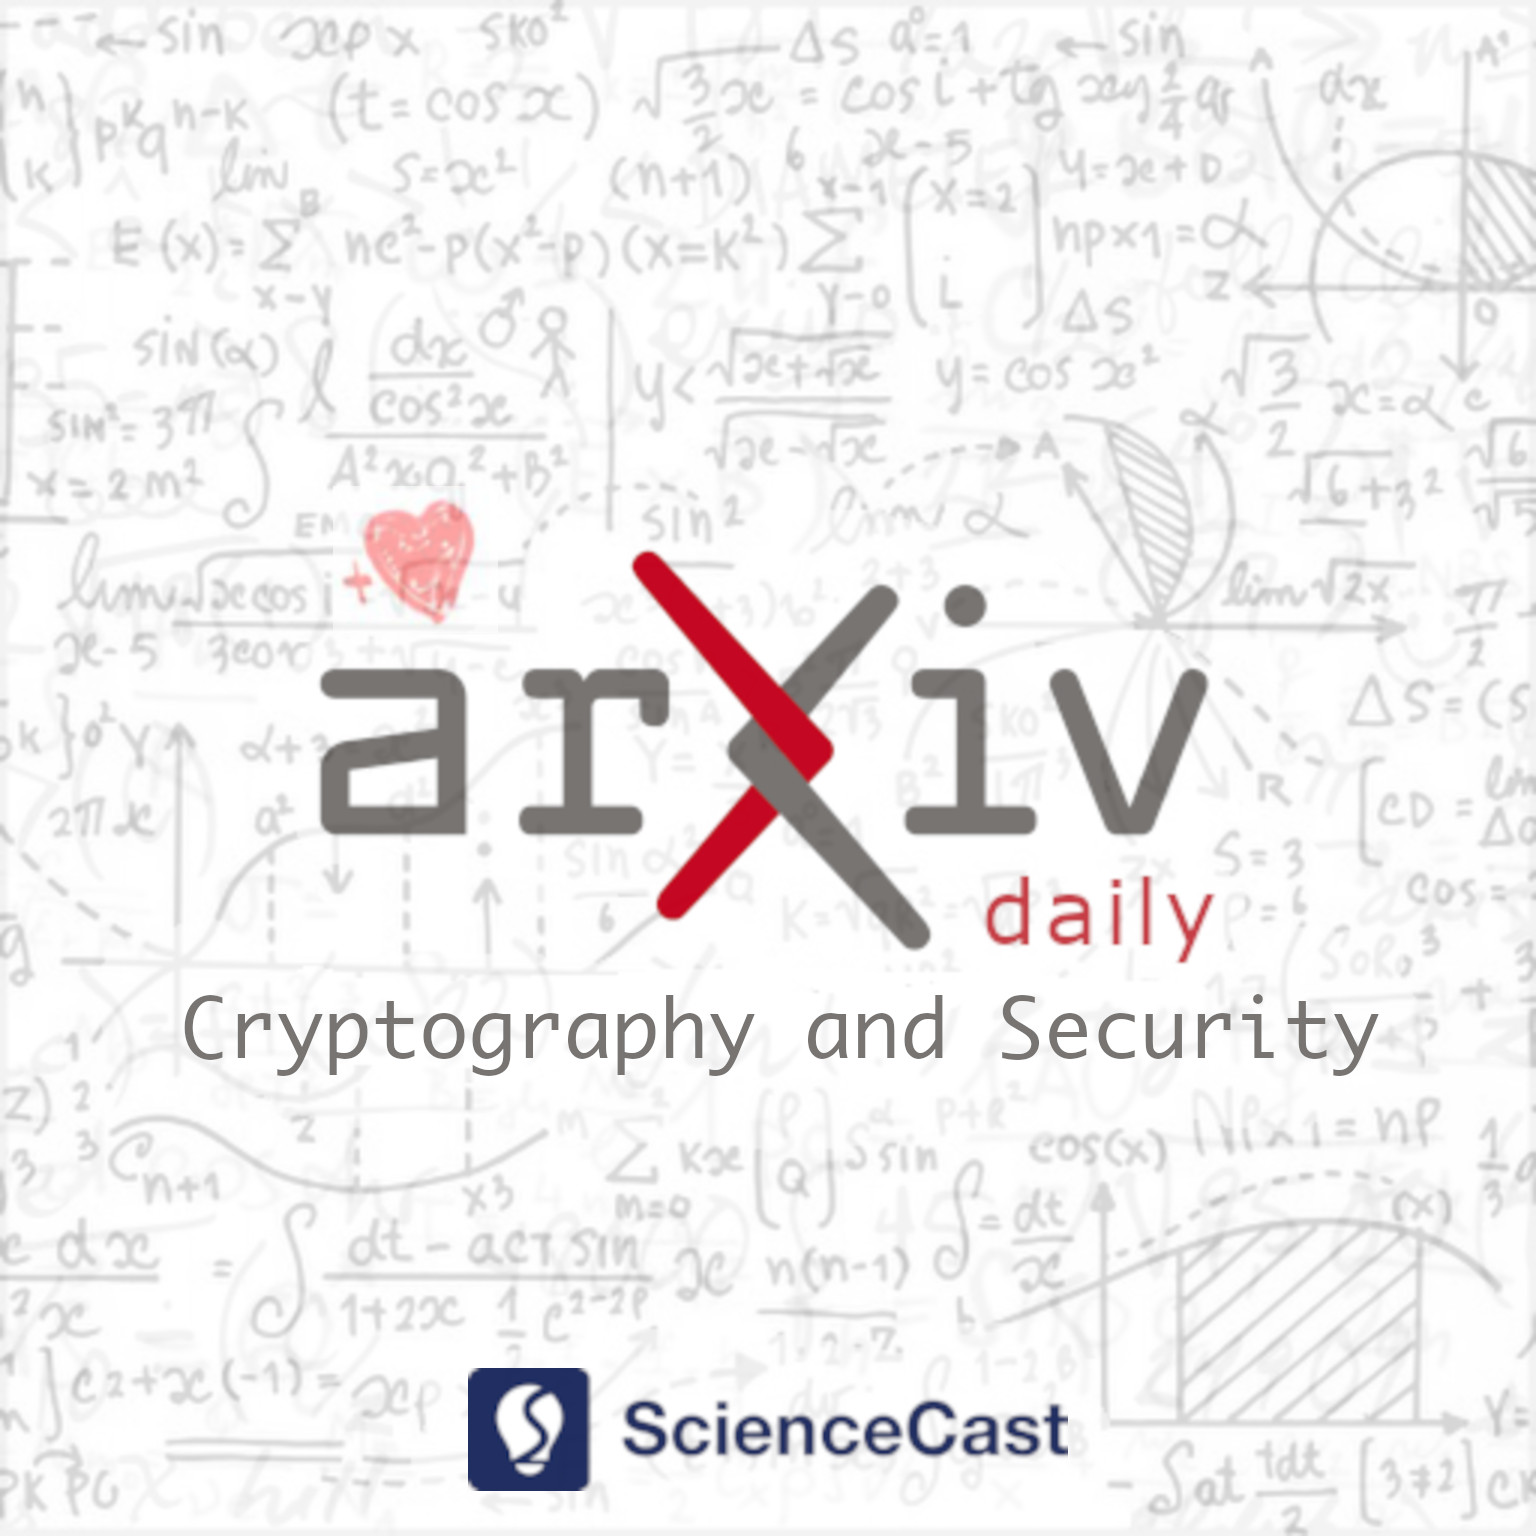 arXiv daily: Cryptography and Security